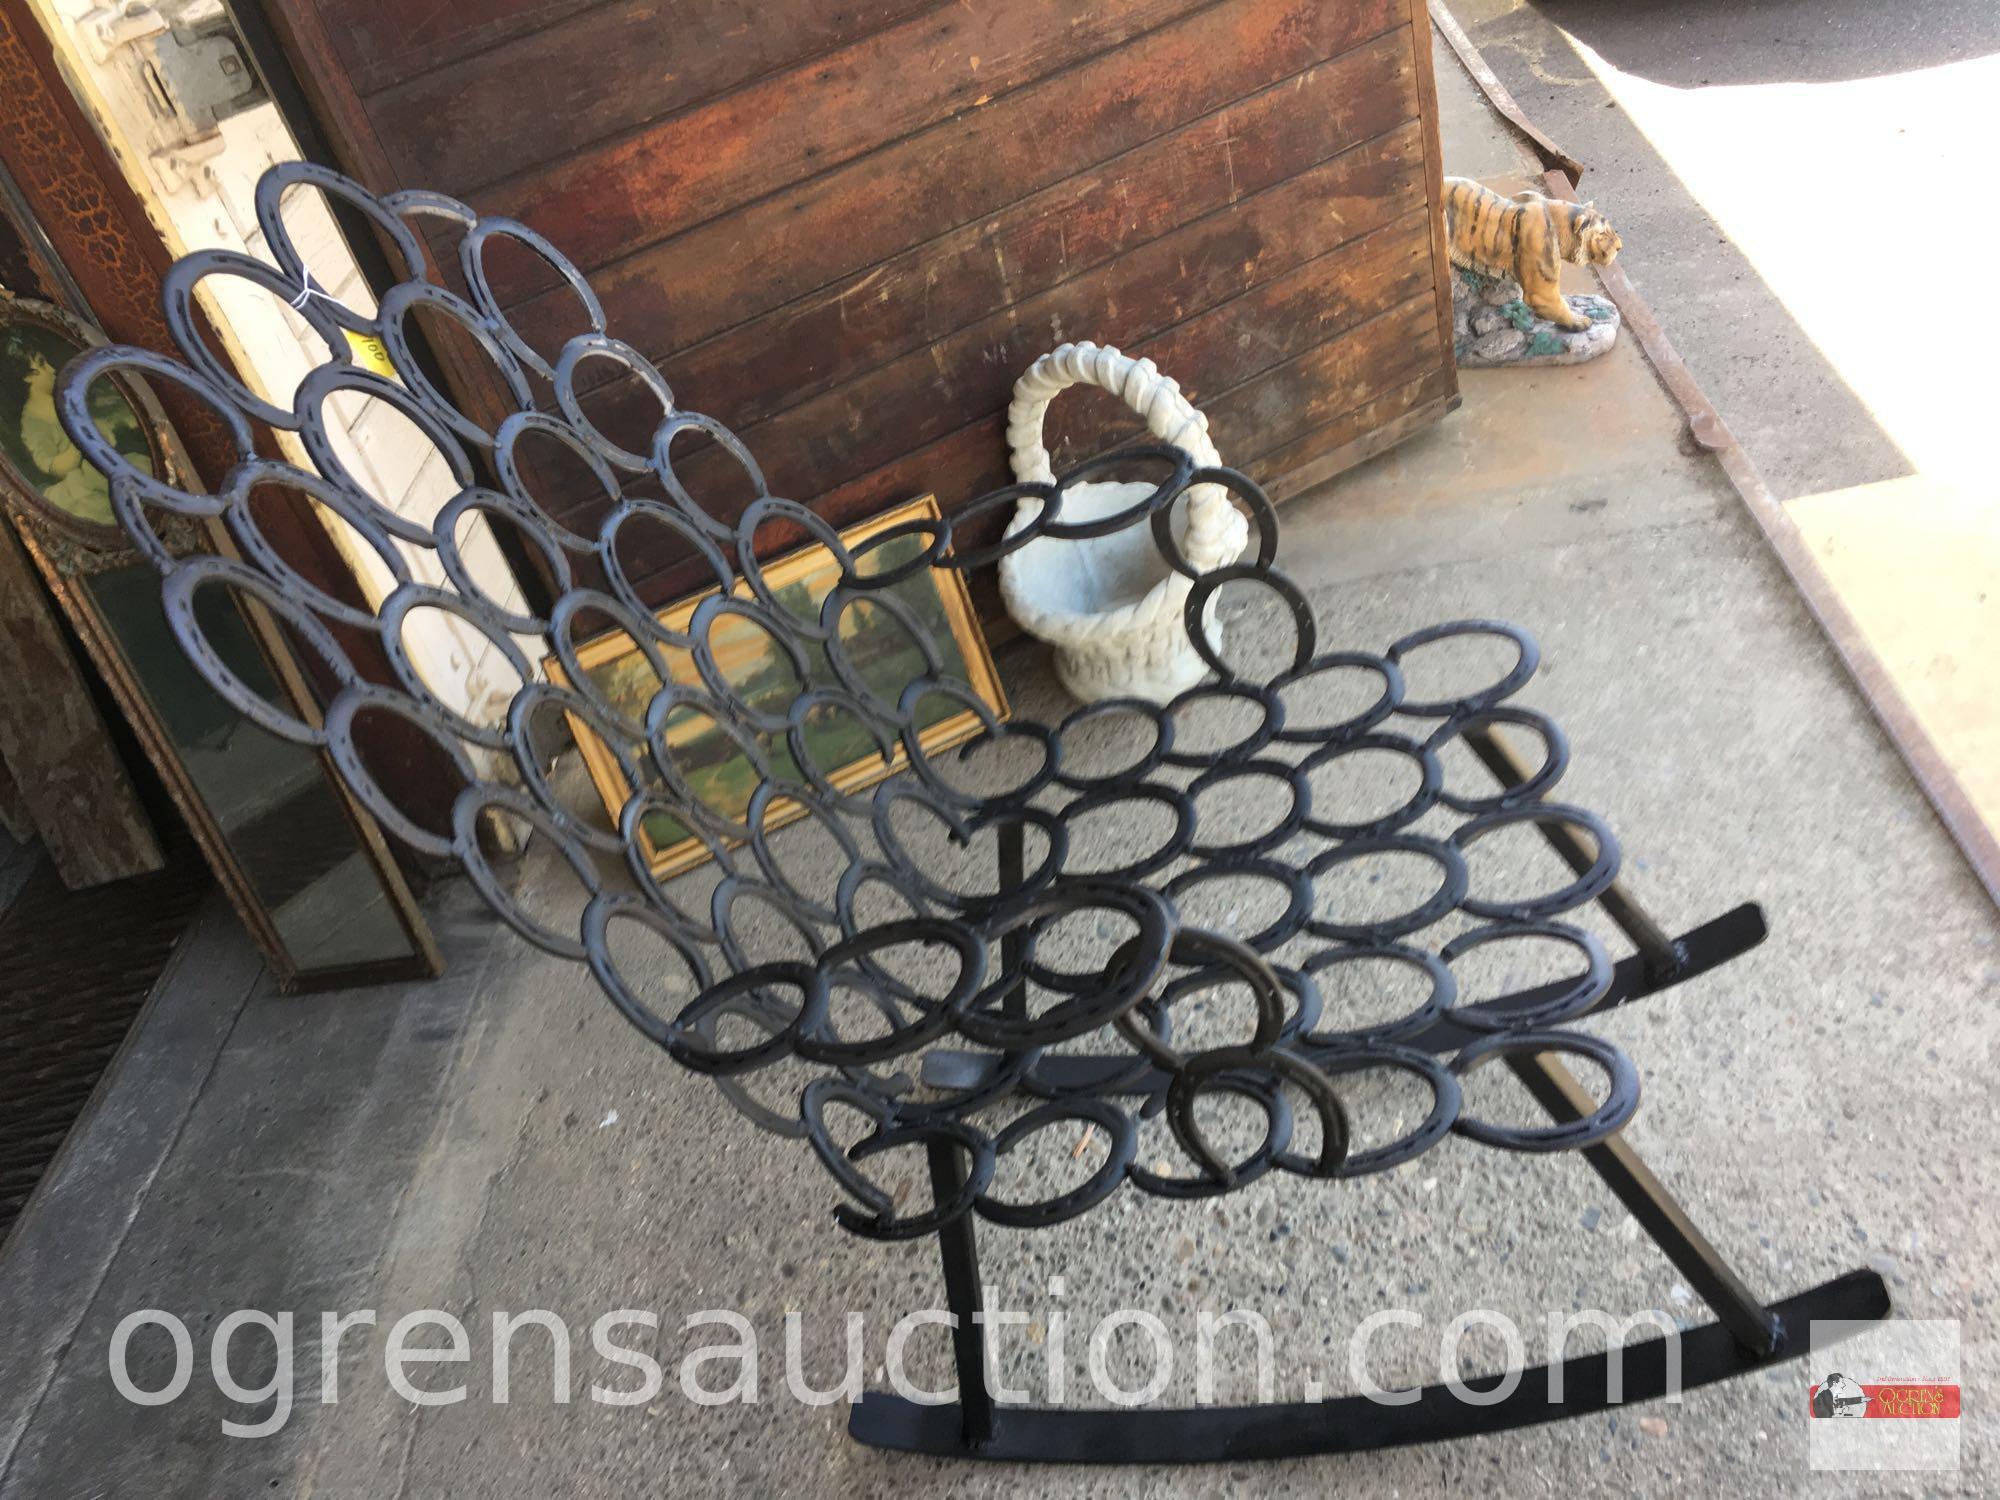 Rocking chair - Iron Horseshoe rocking chair, hand crafted with 69 horseshoes